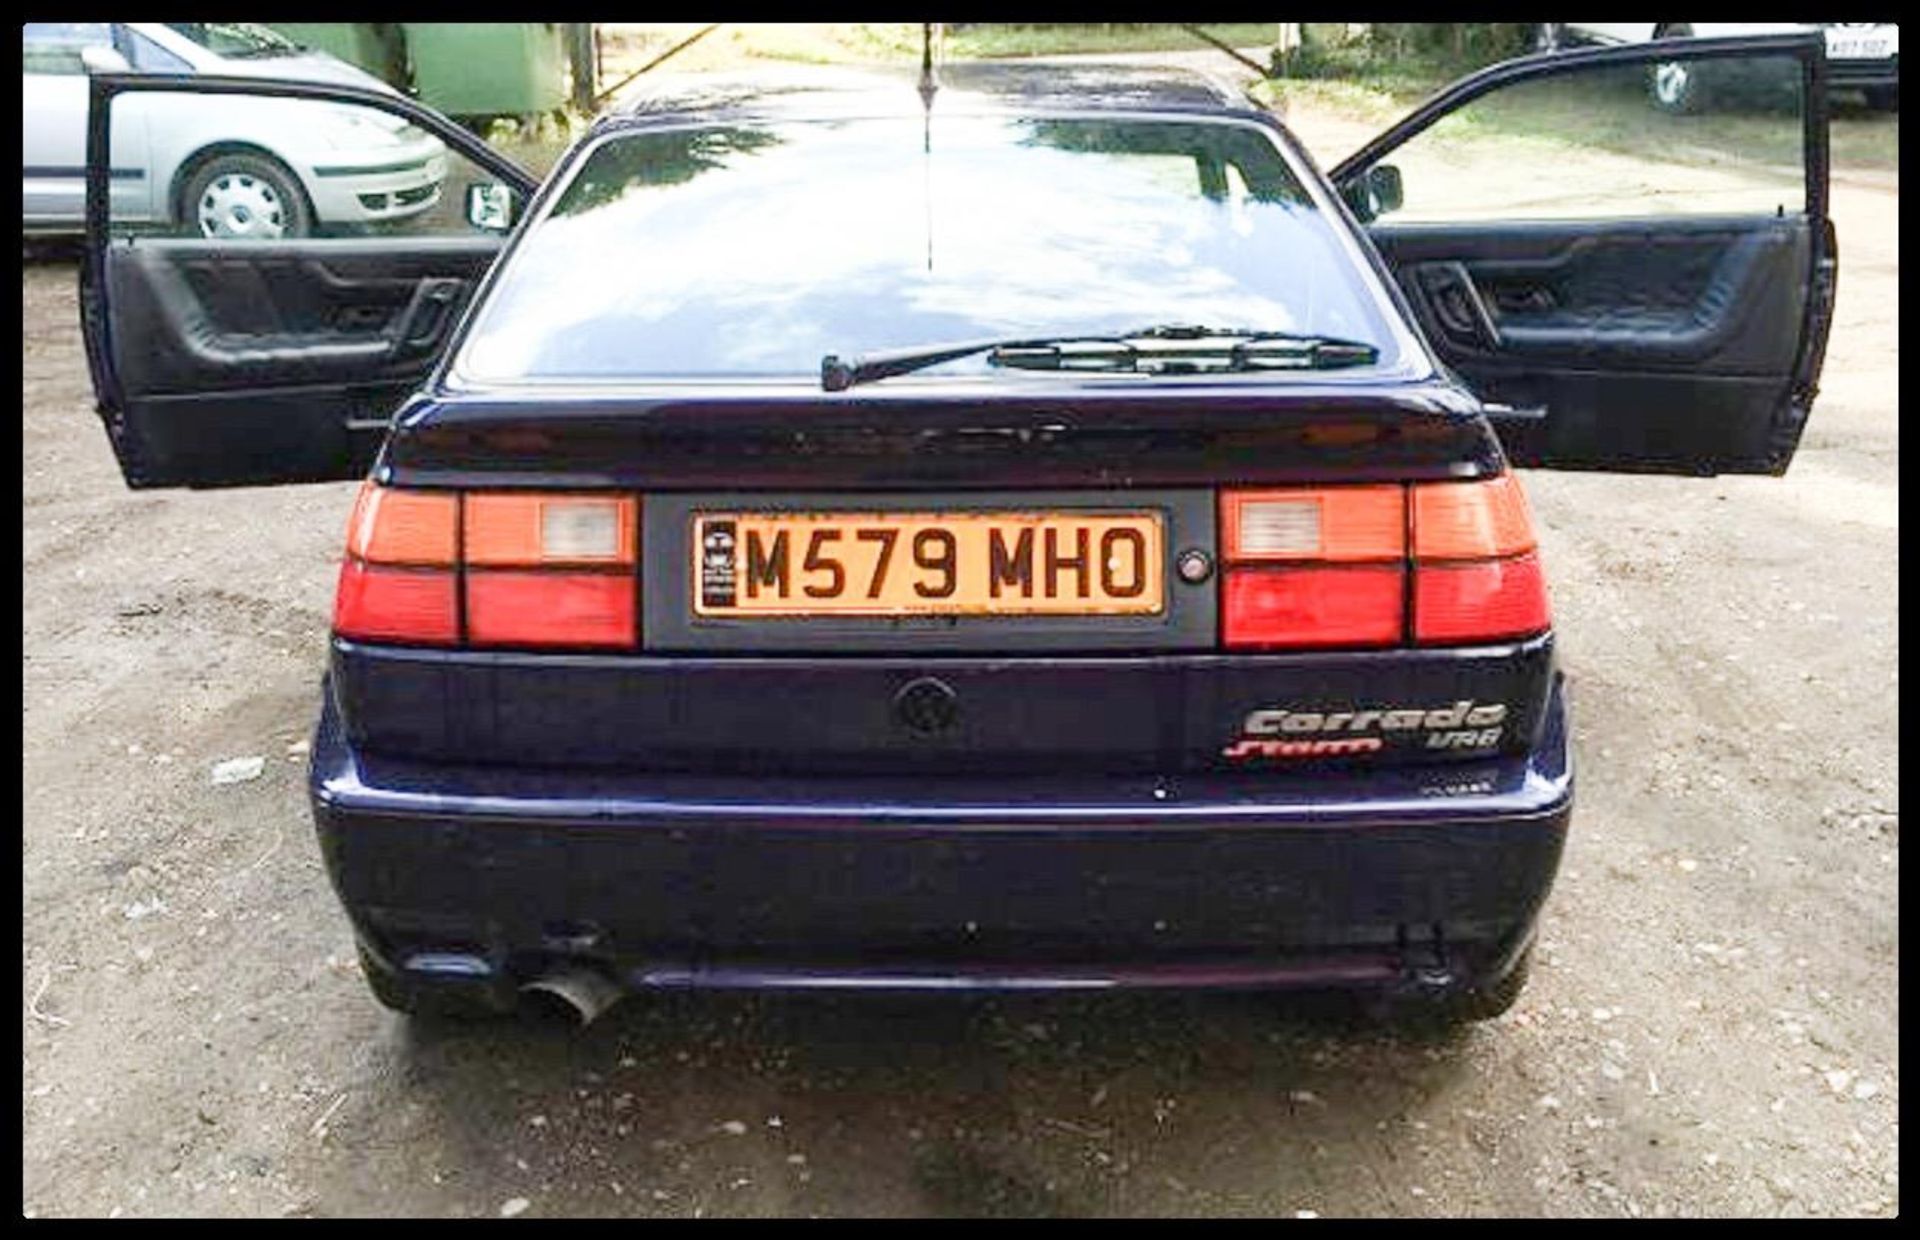 A 1995 Volkswagen Corrado VR6 Storm Limited Edition, registration number M579 MHD, Mystic blue. - Image 2 of 4